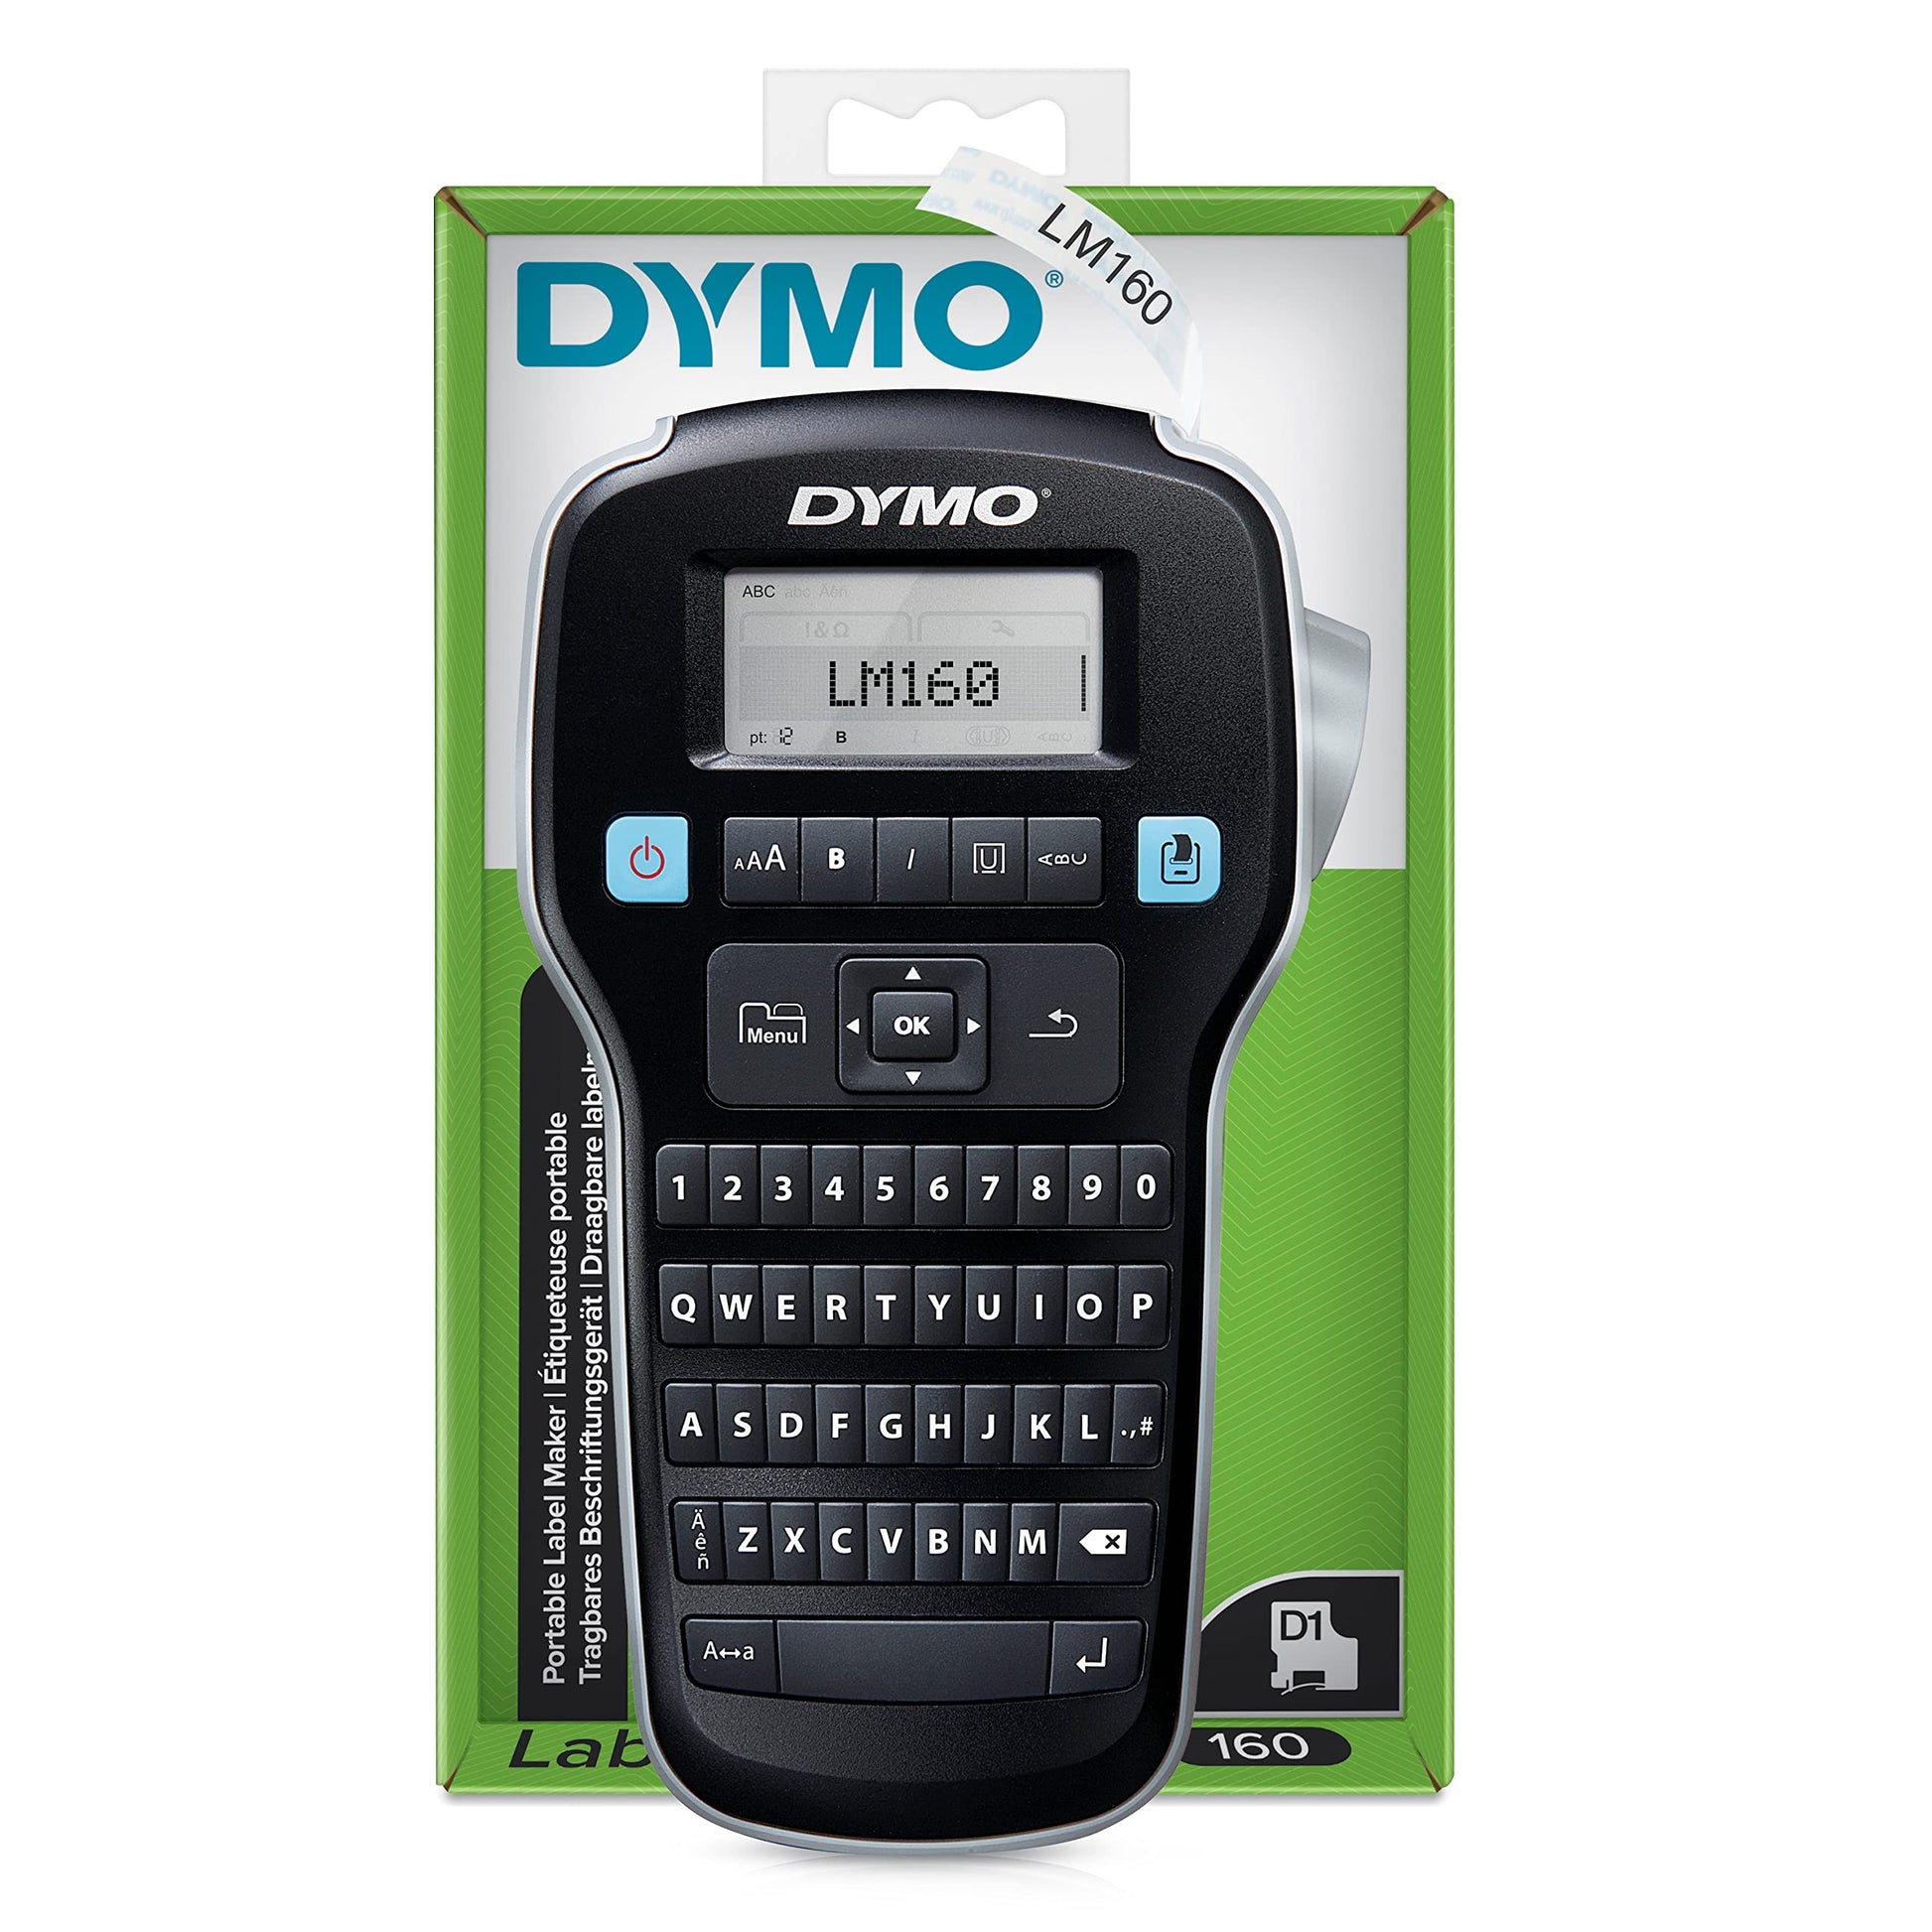 Dymo LabelManager 160 Label Maker | Handheld Label Printer with Keyboard | Includes Black White D1 Tape | for Home & Office – XavOcean